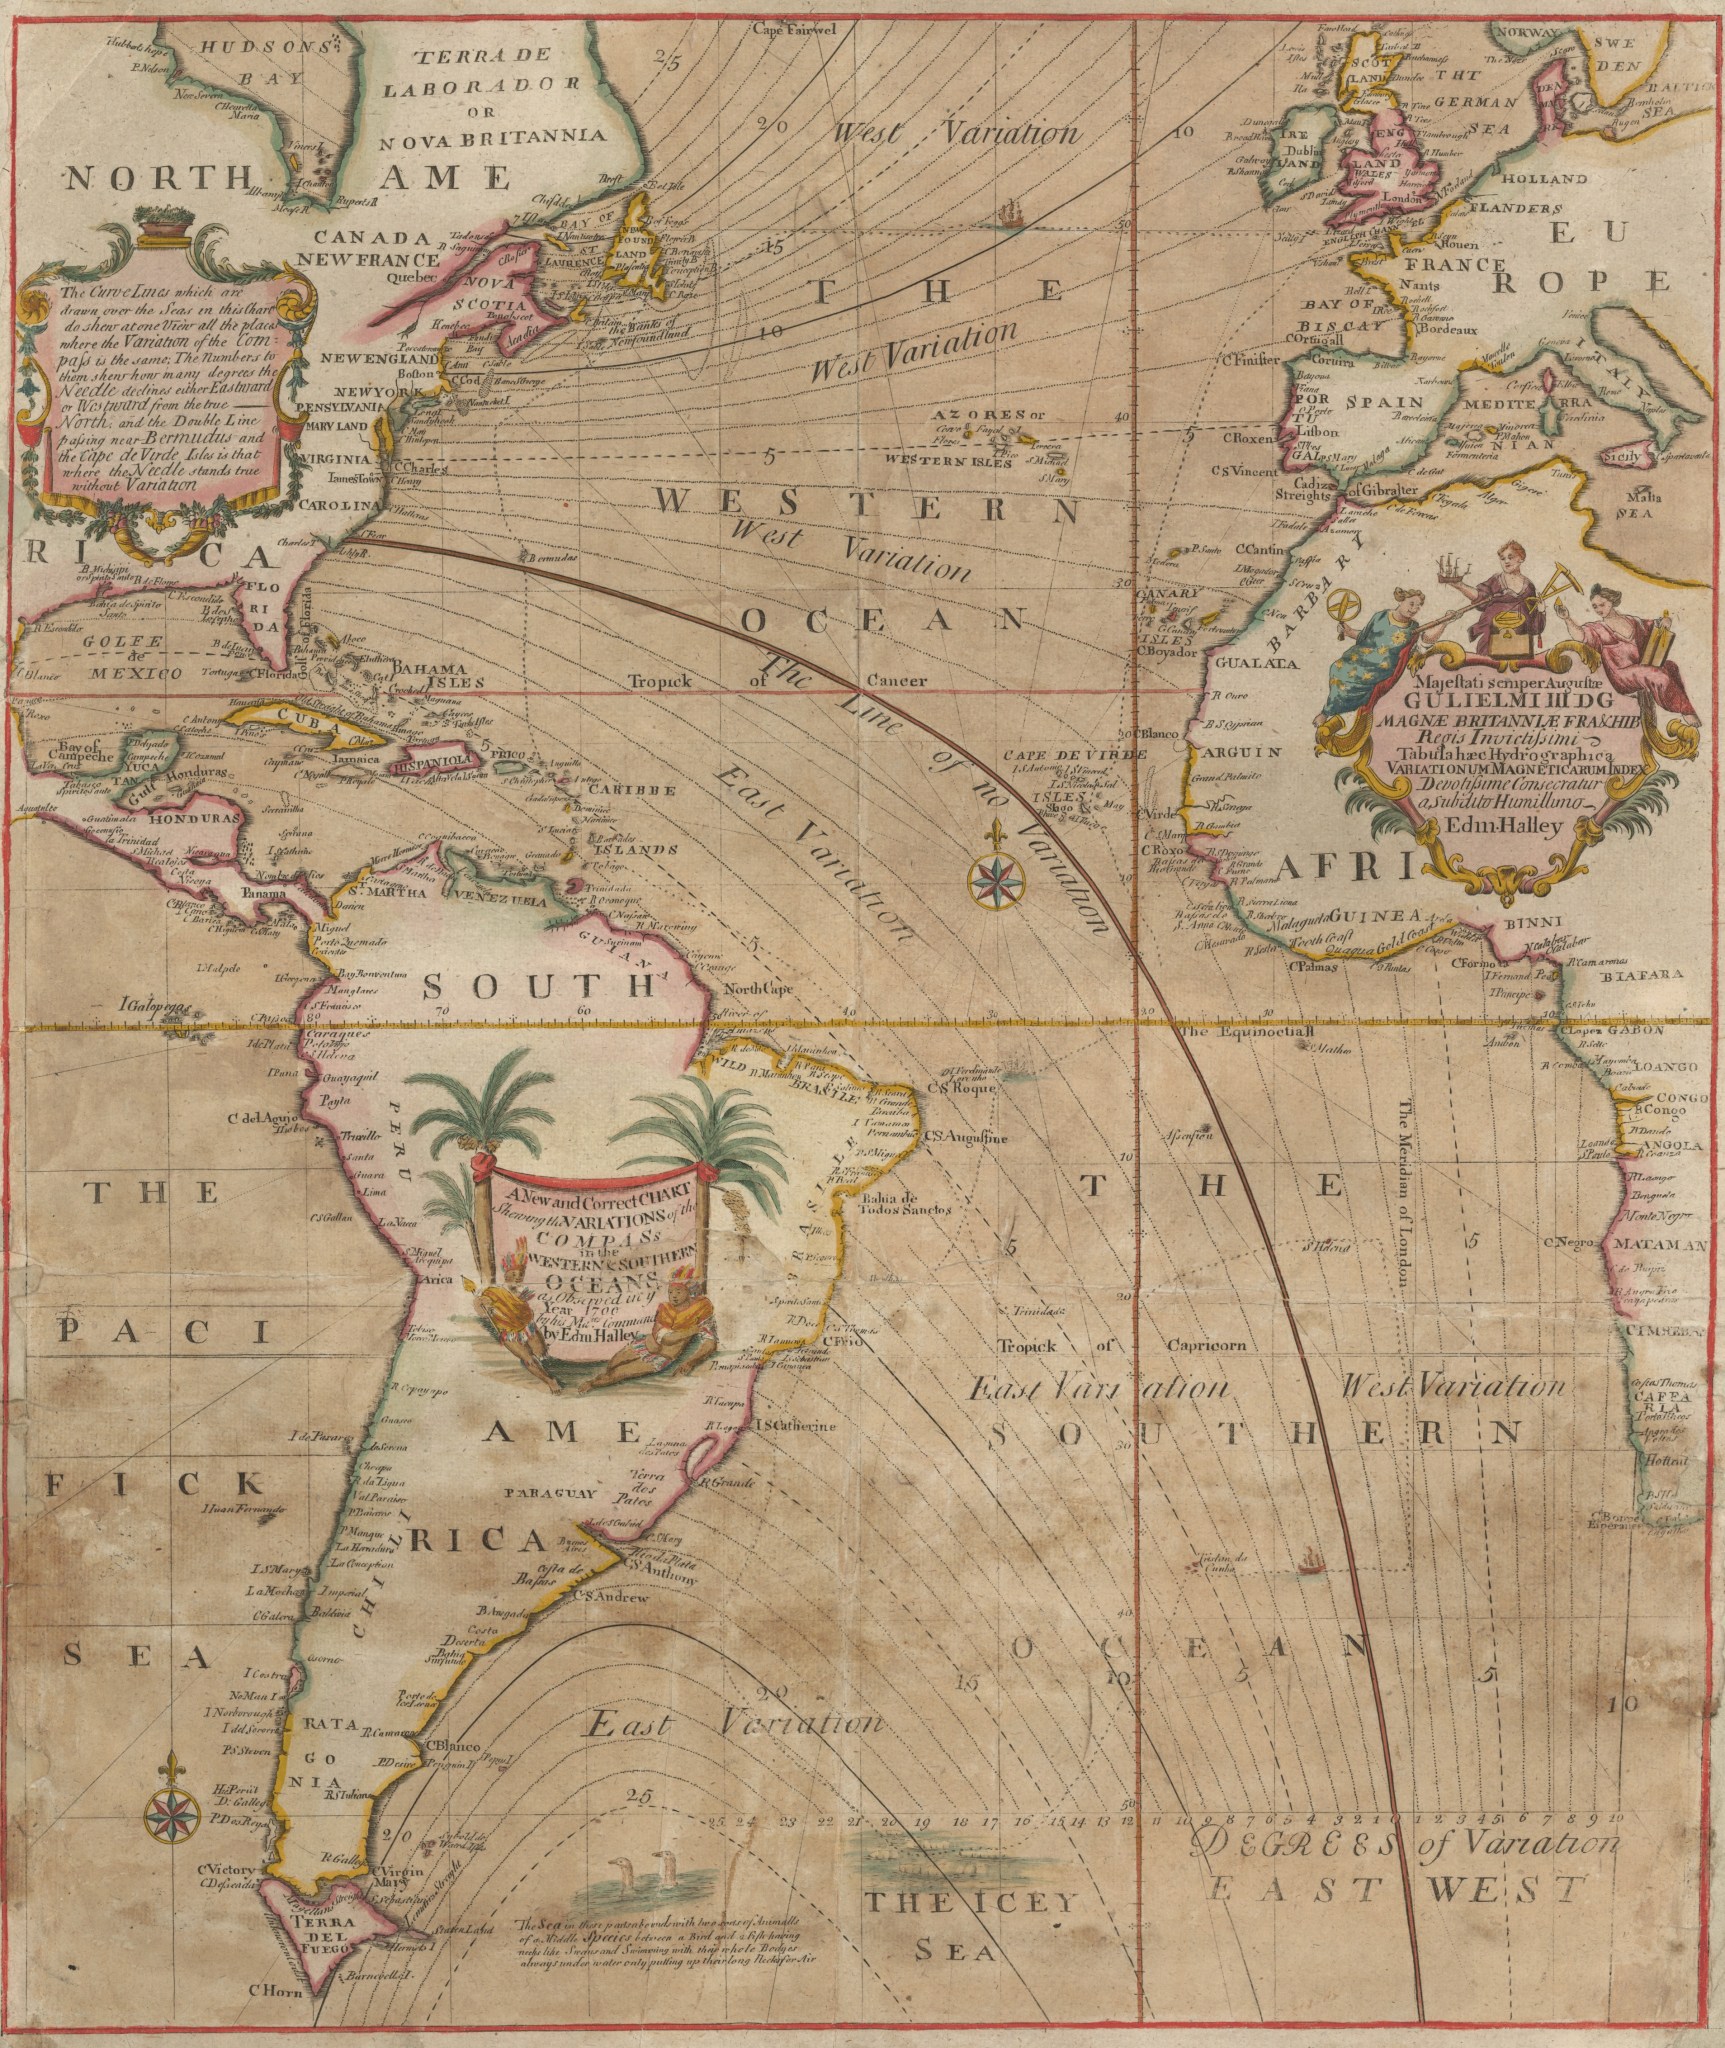 An old map on brown paper shows eastern North America, South America, and western Europe and Africa. Various solid and dashed lines extend across the Atlantic Ocean from the Americas toward Europe, Africa, and the north and south poles.